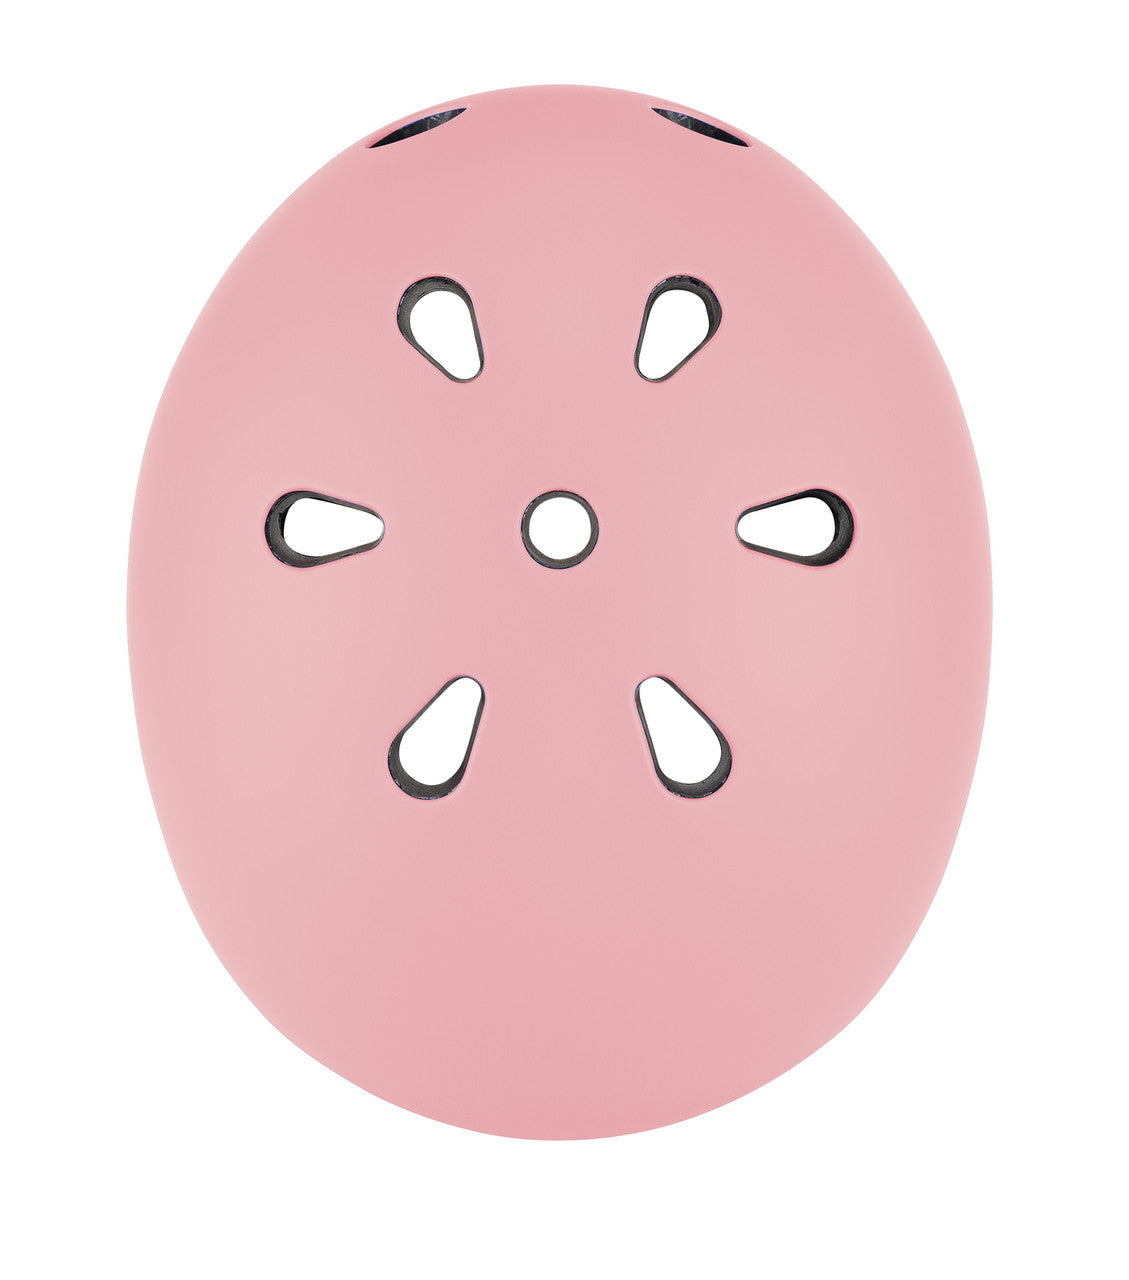 Globber Helmet for Toddlers - Pastel Pink - Extra Small (46-51cm)